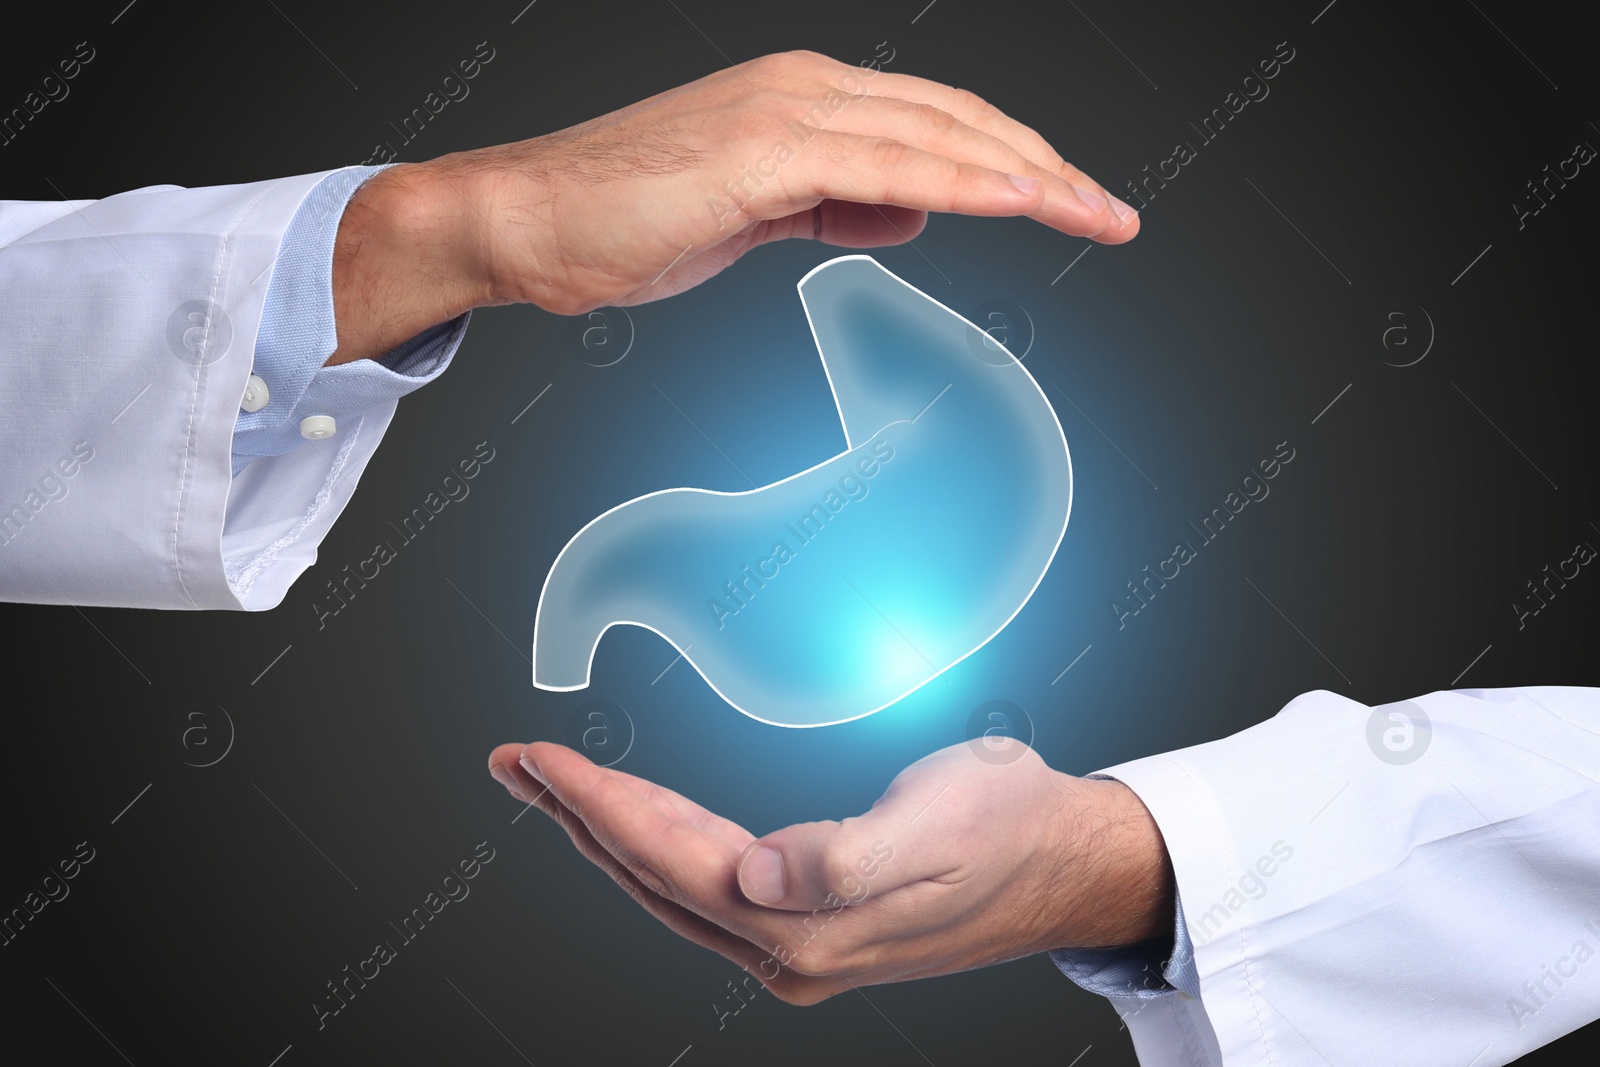 Image of Symptoms and treatment of heartburn and other gastrointestinal diseases. Doctor holding stomach illustration on black background, closeup